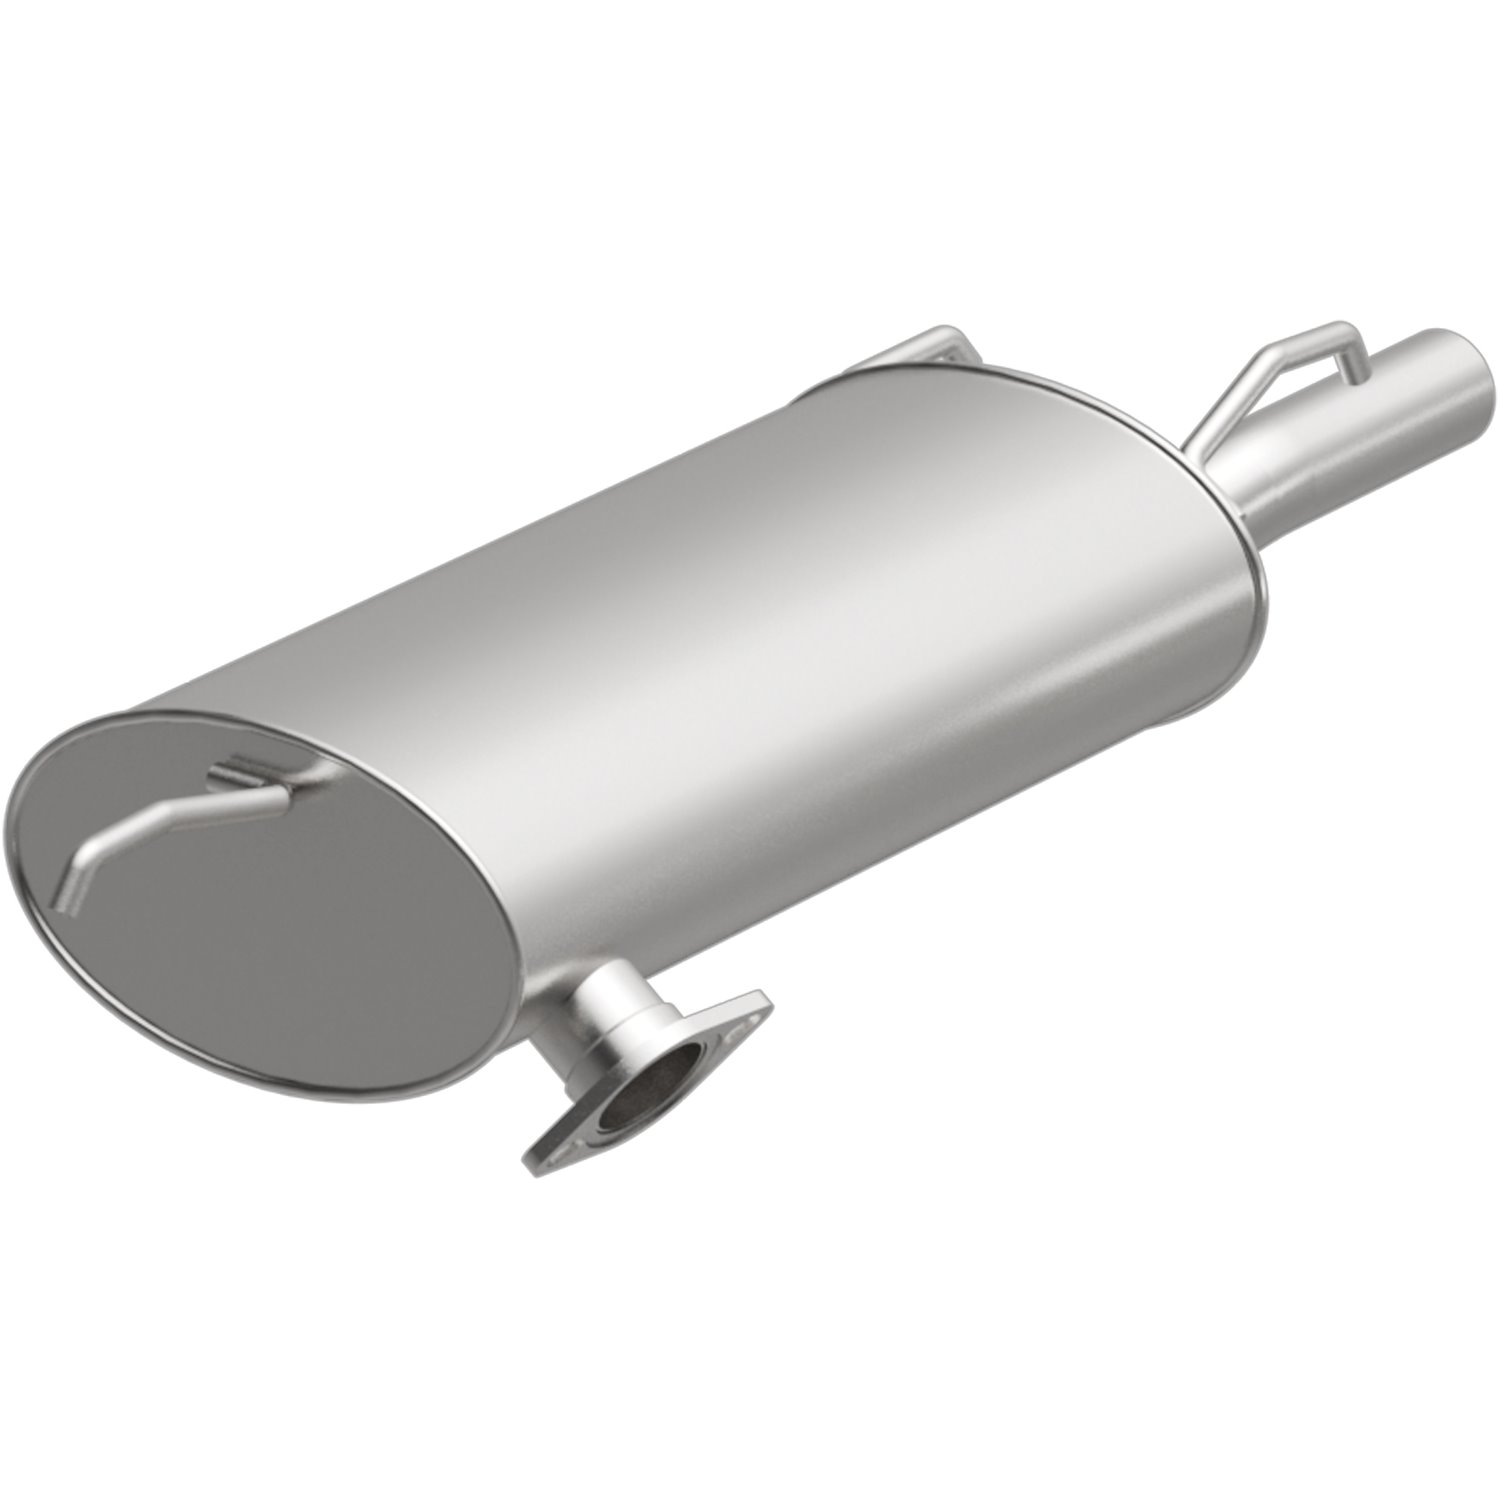 Direct-Fit Exhaust Muffler, 1992-1996 Toyota Camry 2.2L